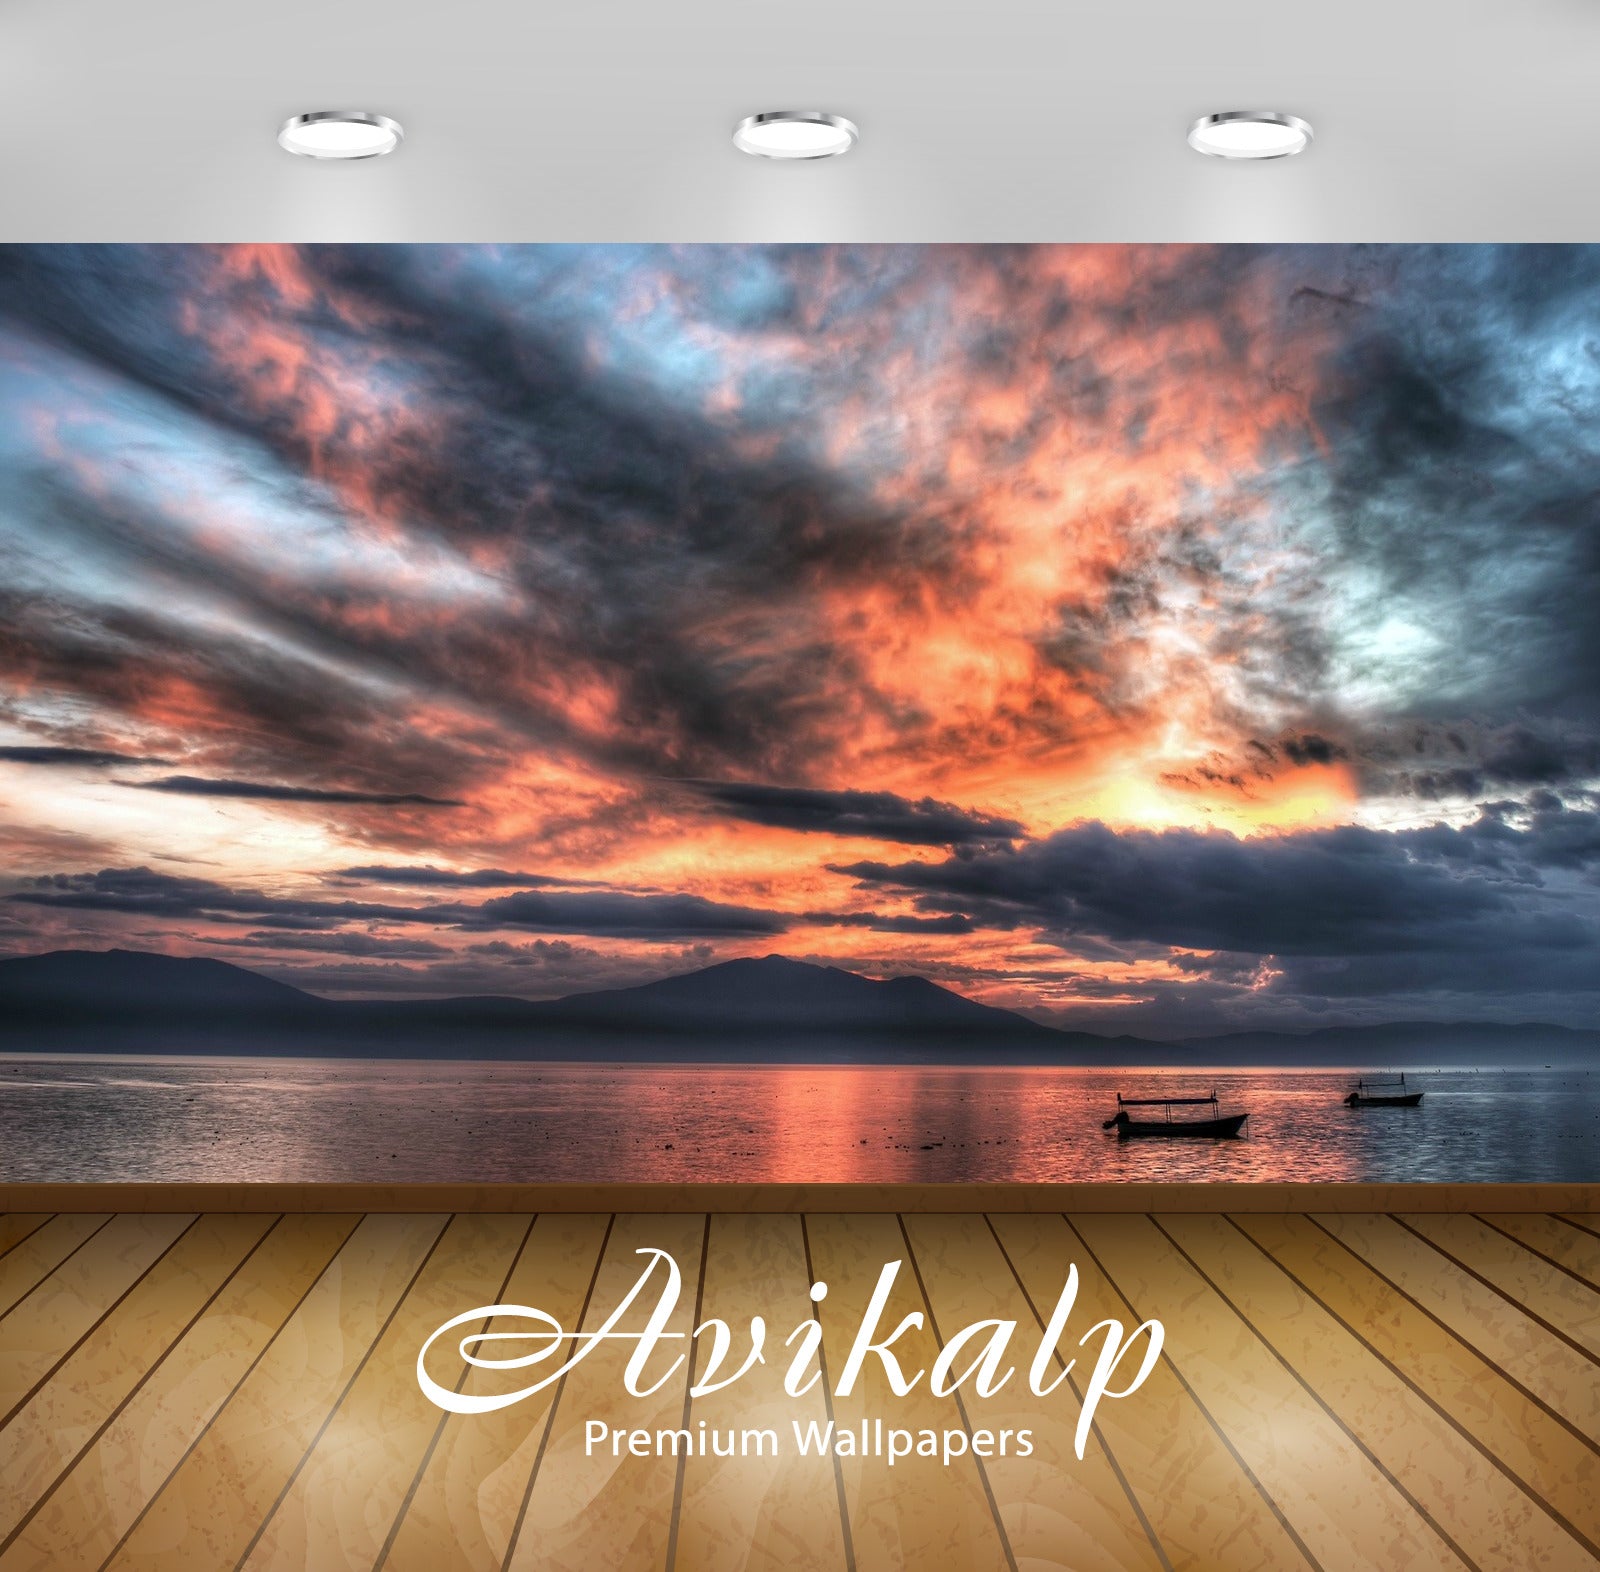 Avikalp Exclusive Clouds Sunset Ocean AWI1108 HD Wallpapers for Living room, Hall, Kids Room, Kitche